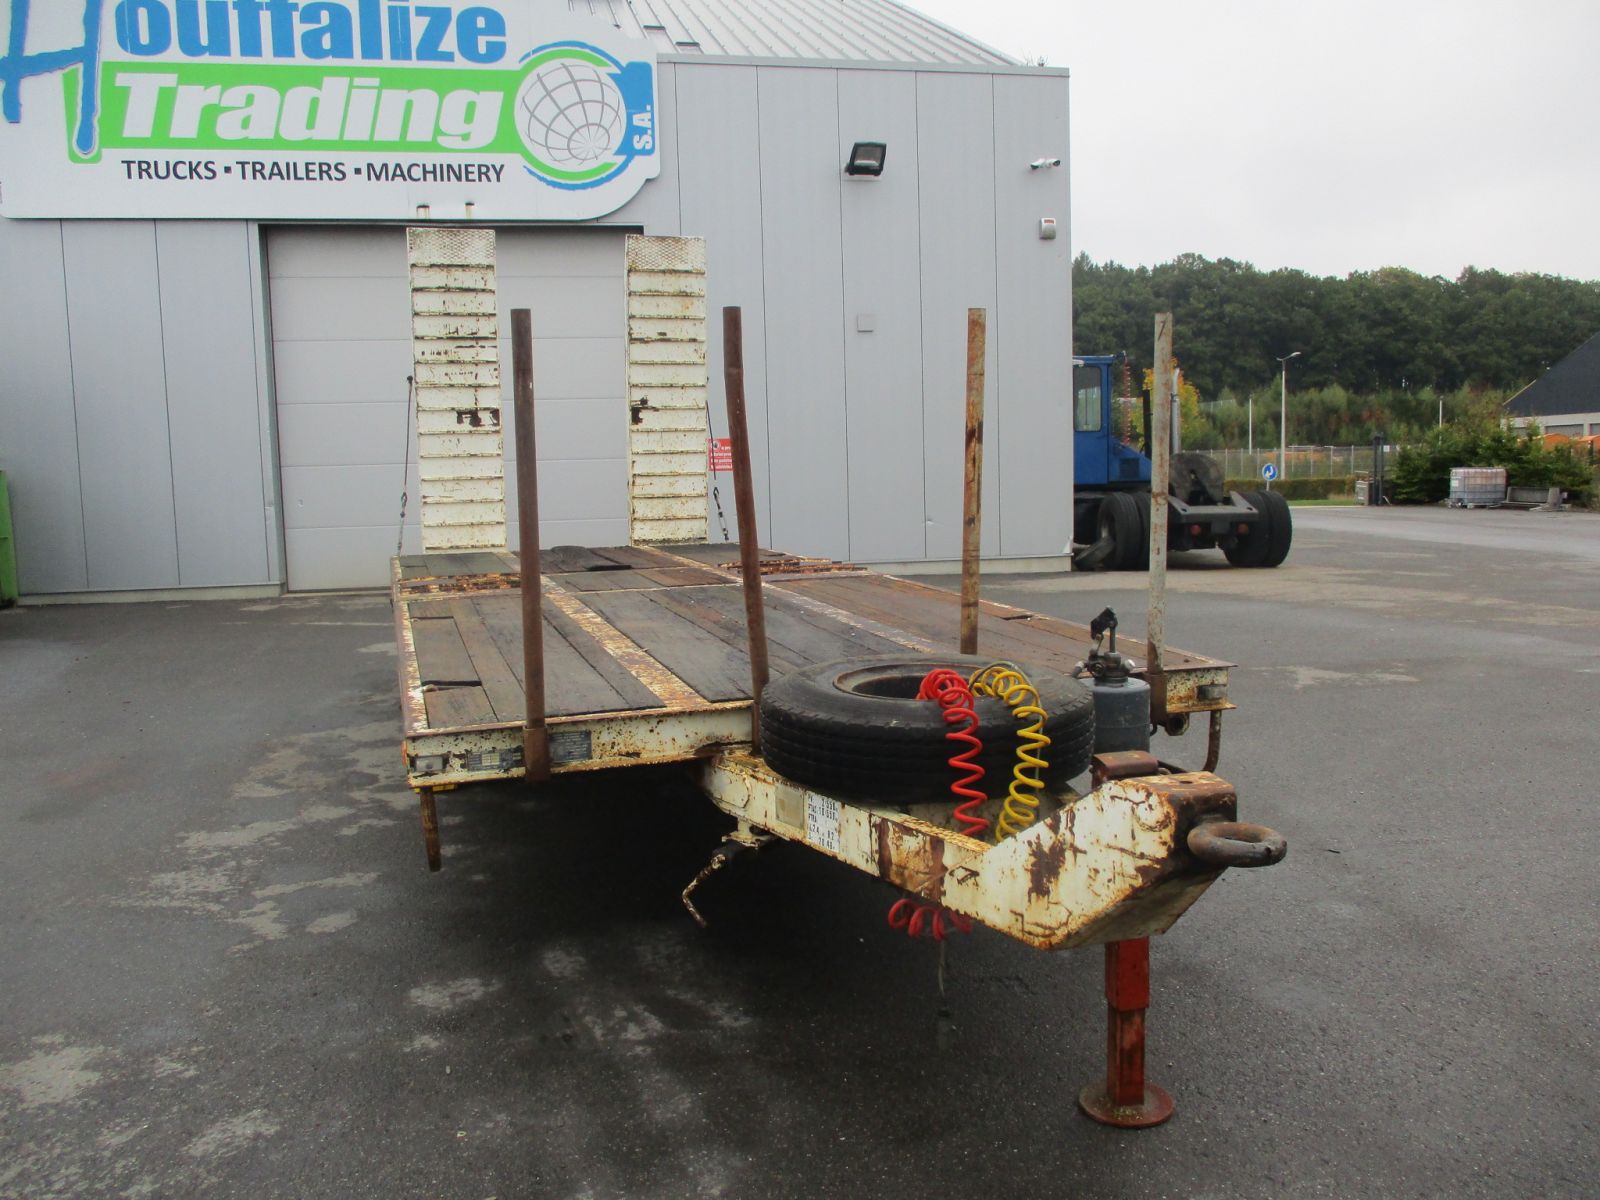 Auflieger - DEMCO   Chariot porte-engin (Belgique - Europe) - Houffalize Trading s.a.